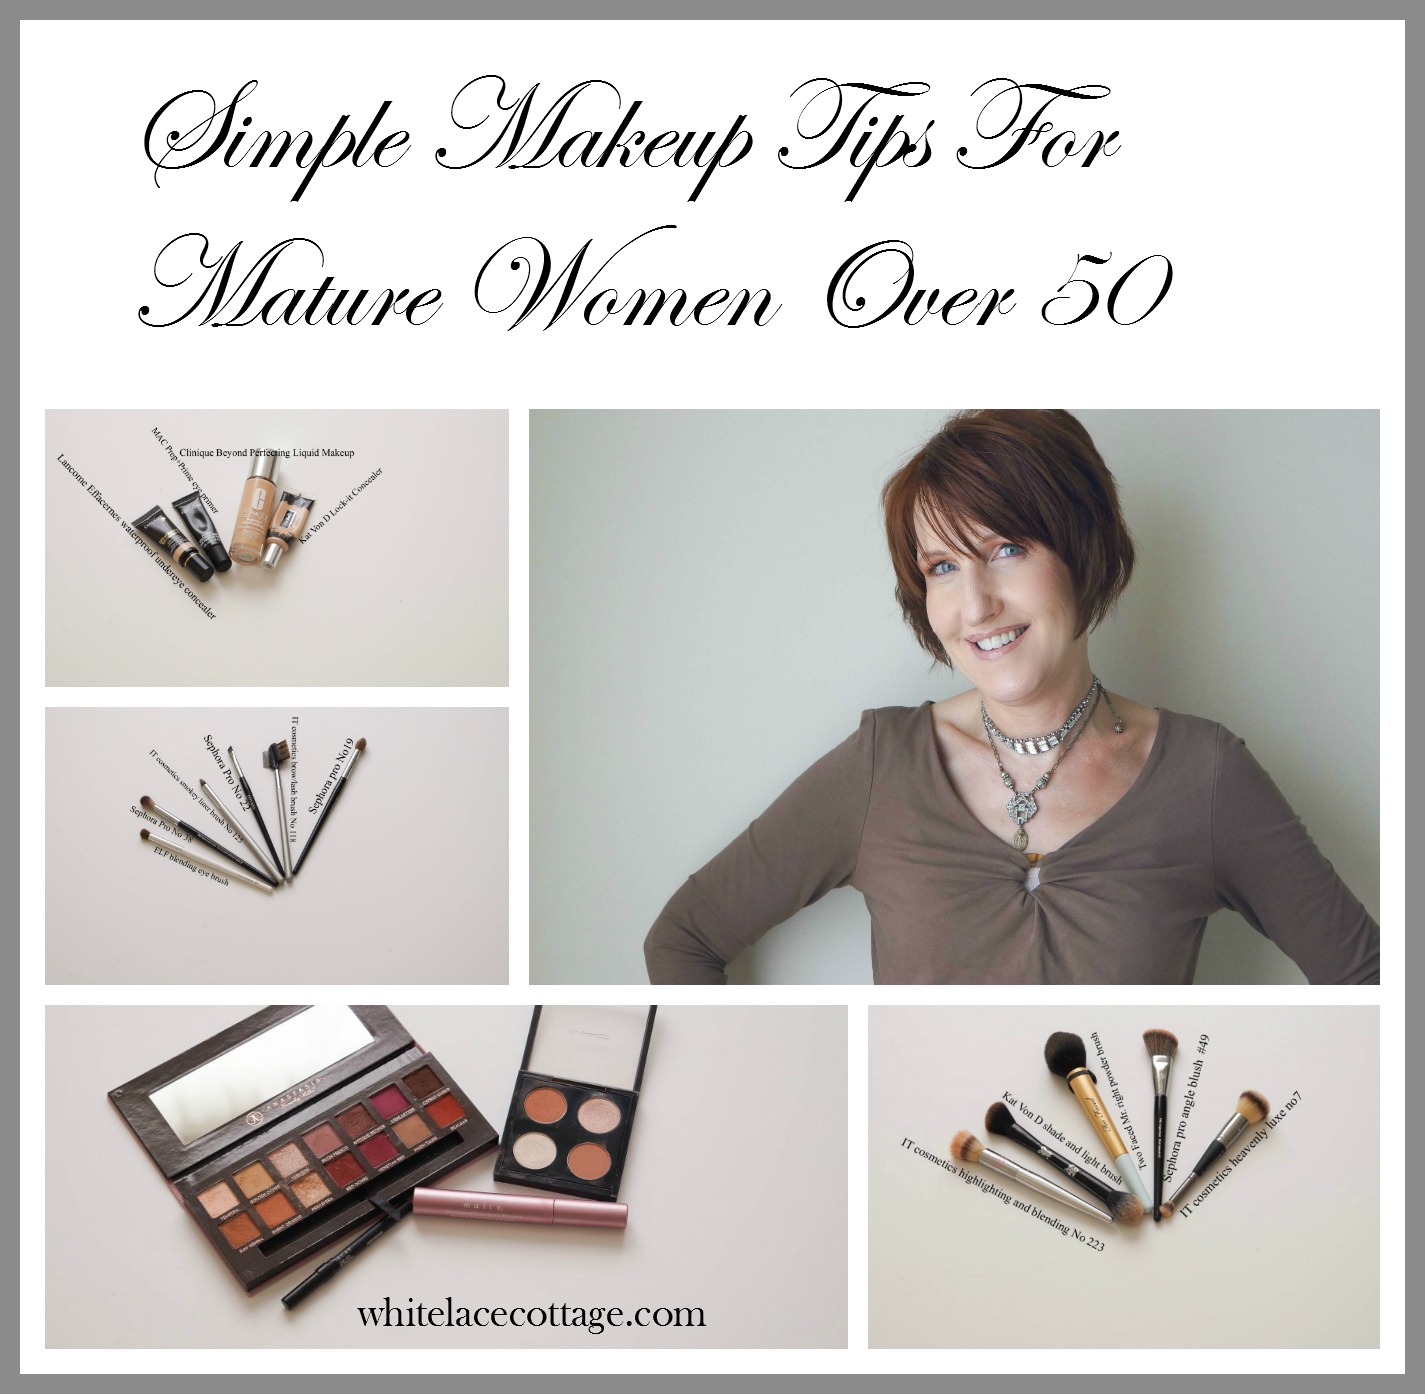 Makeup Tips For Women Over 50